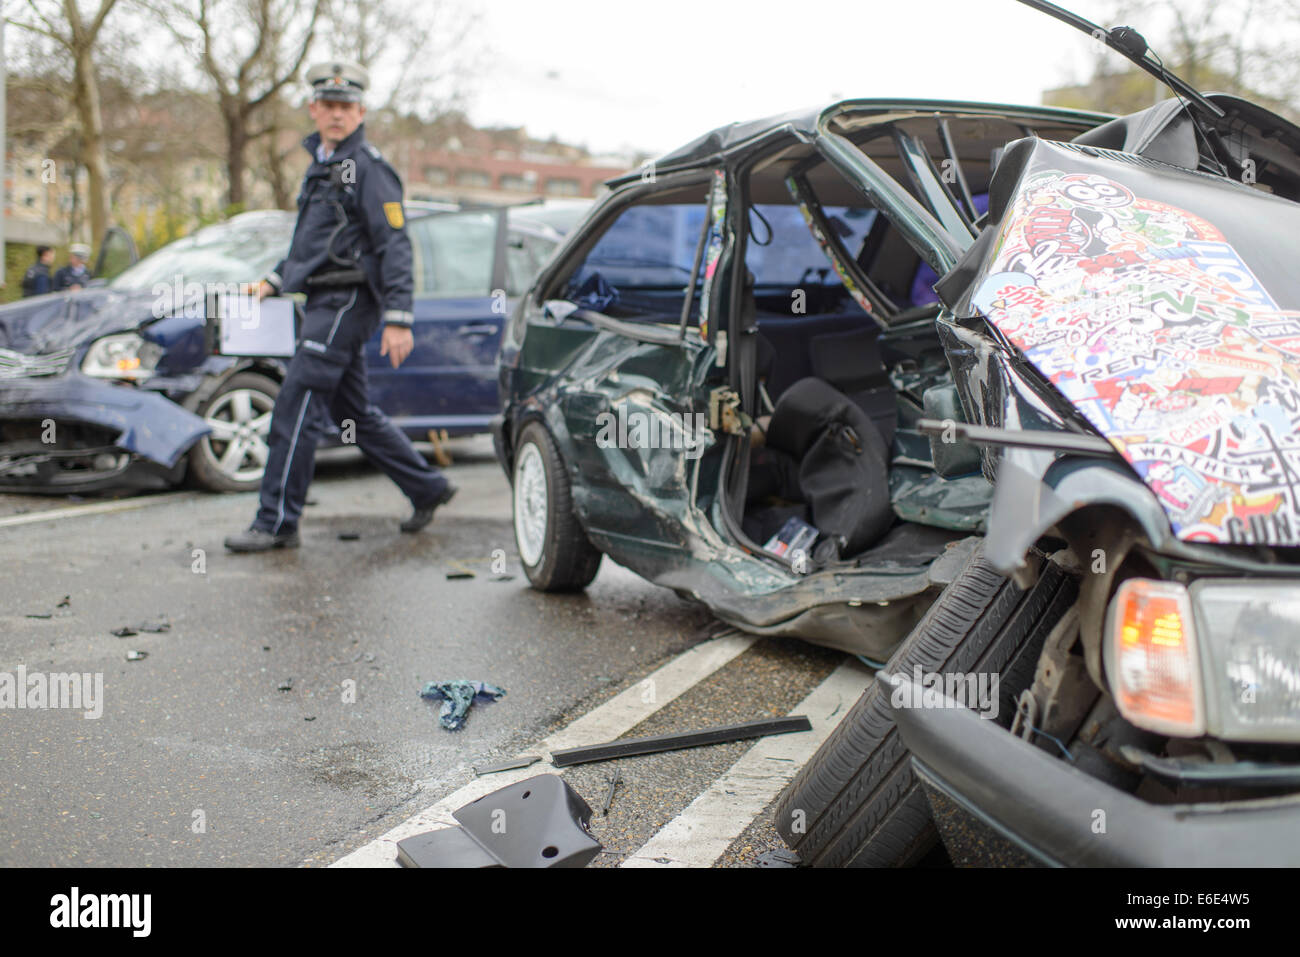 Serious accident, a VW Polo and a VW Touran collided in oncoming traffic,  car wrecks in the street, police officer Stock Photo - Alamy